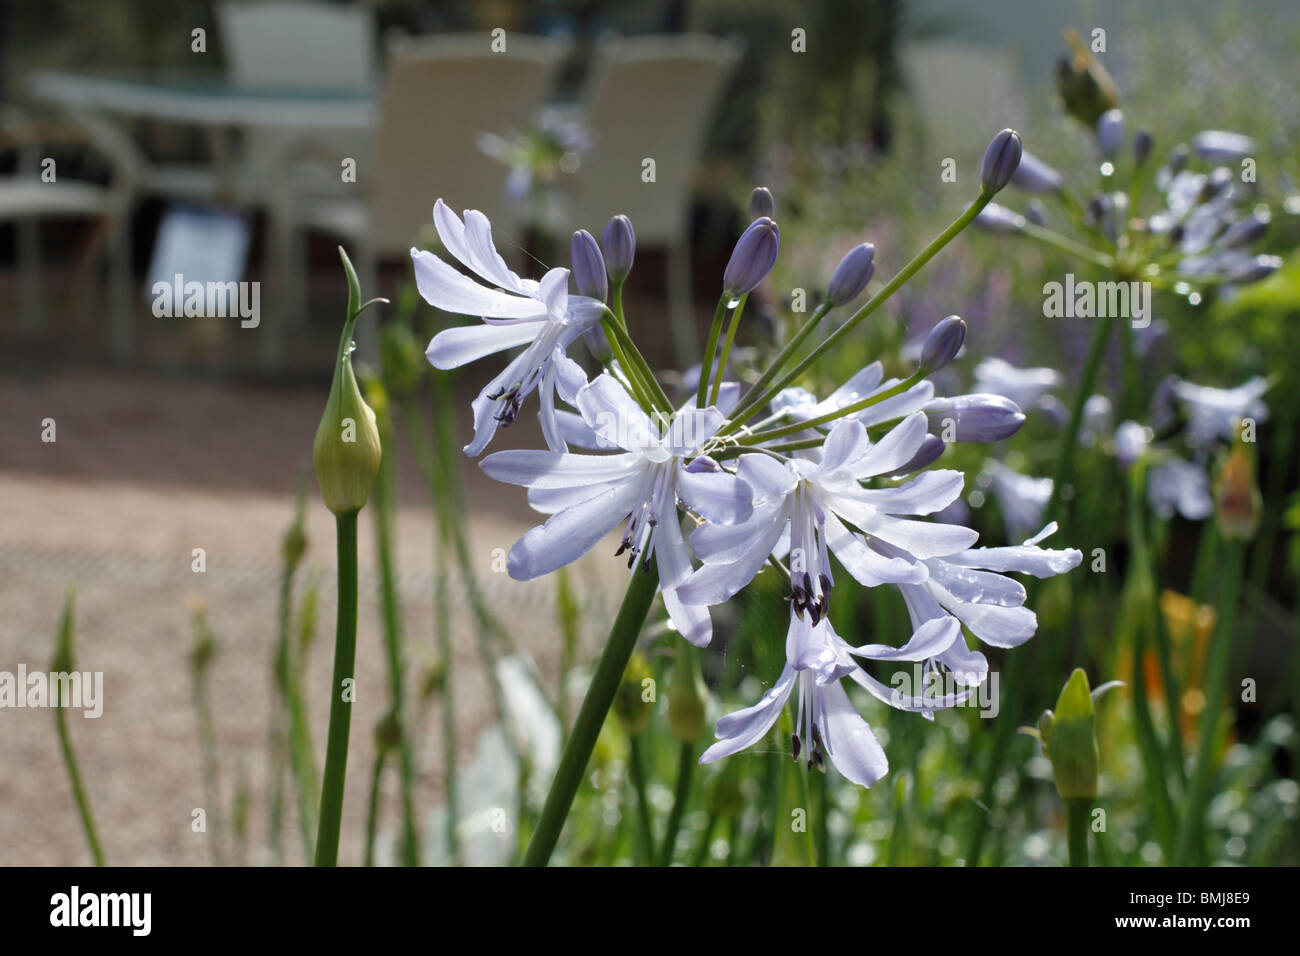 Agapanthus 'Streamline' (African lily 'Streamline') 'Streamline' is a small, semi-evergreen perennial with clumps of strap-like, mid-green leaves and open, mid-blue flower heads borne on strong stems in summer to early autumn. Stock Photo